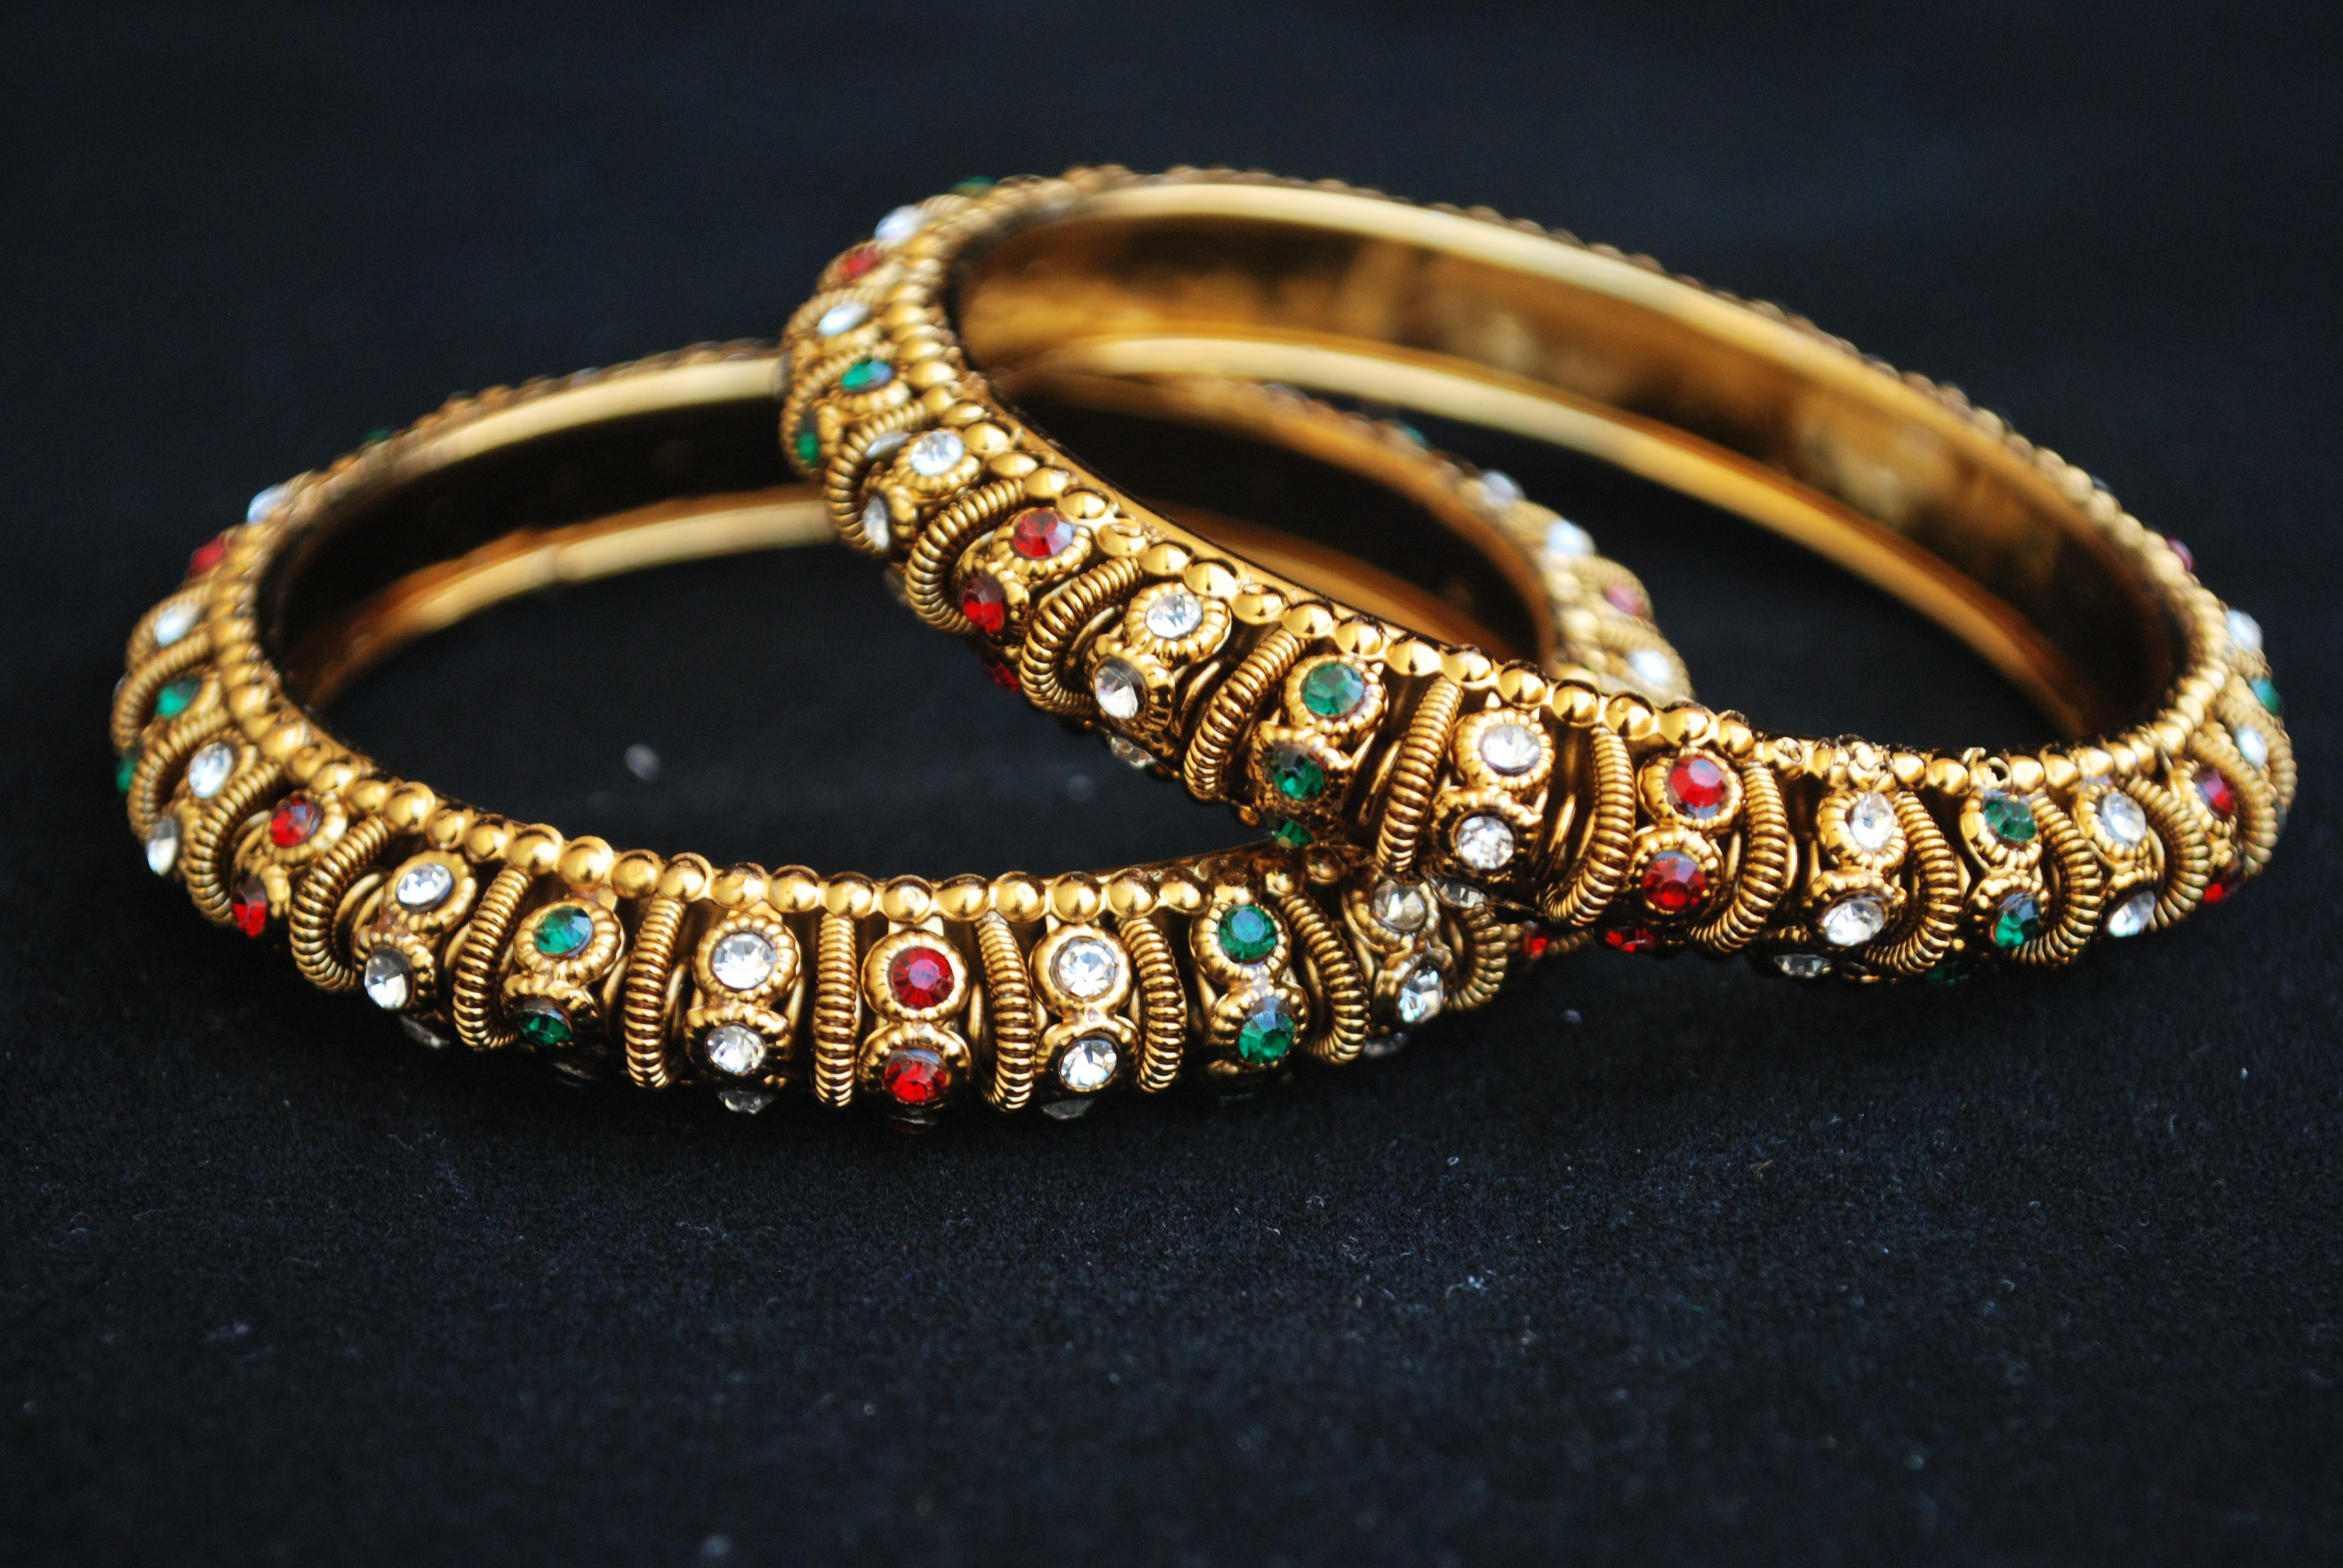 Luxury Gold Square Diamond Snake Bangle Bangles Egyptian For Women And Men Designer  Jewelry For Fashionable Parties, Christmas, Weddings, And Birthdays From  Premiumjewelrystore, $28.33 | DHgate.Com